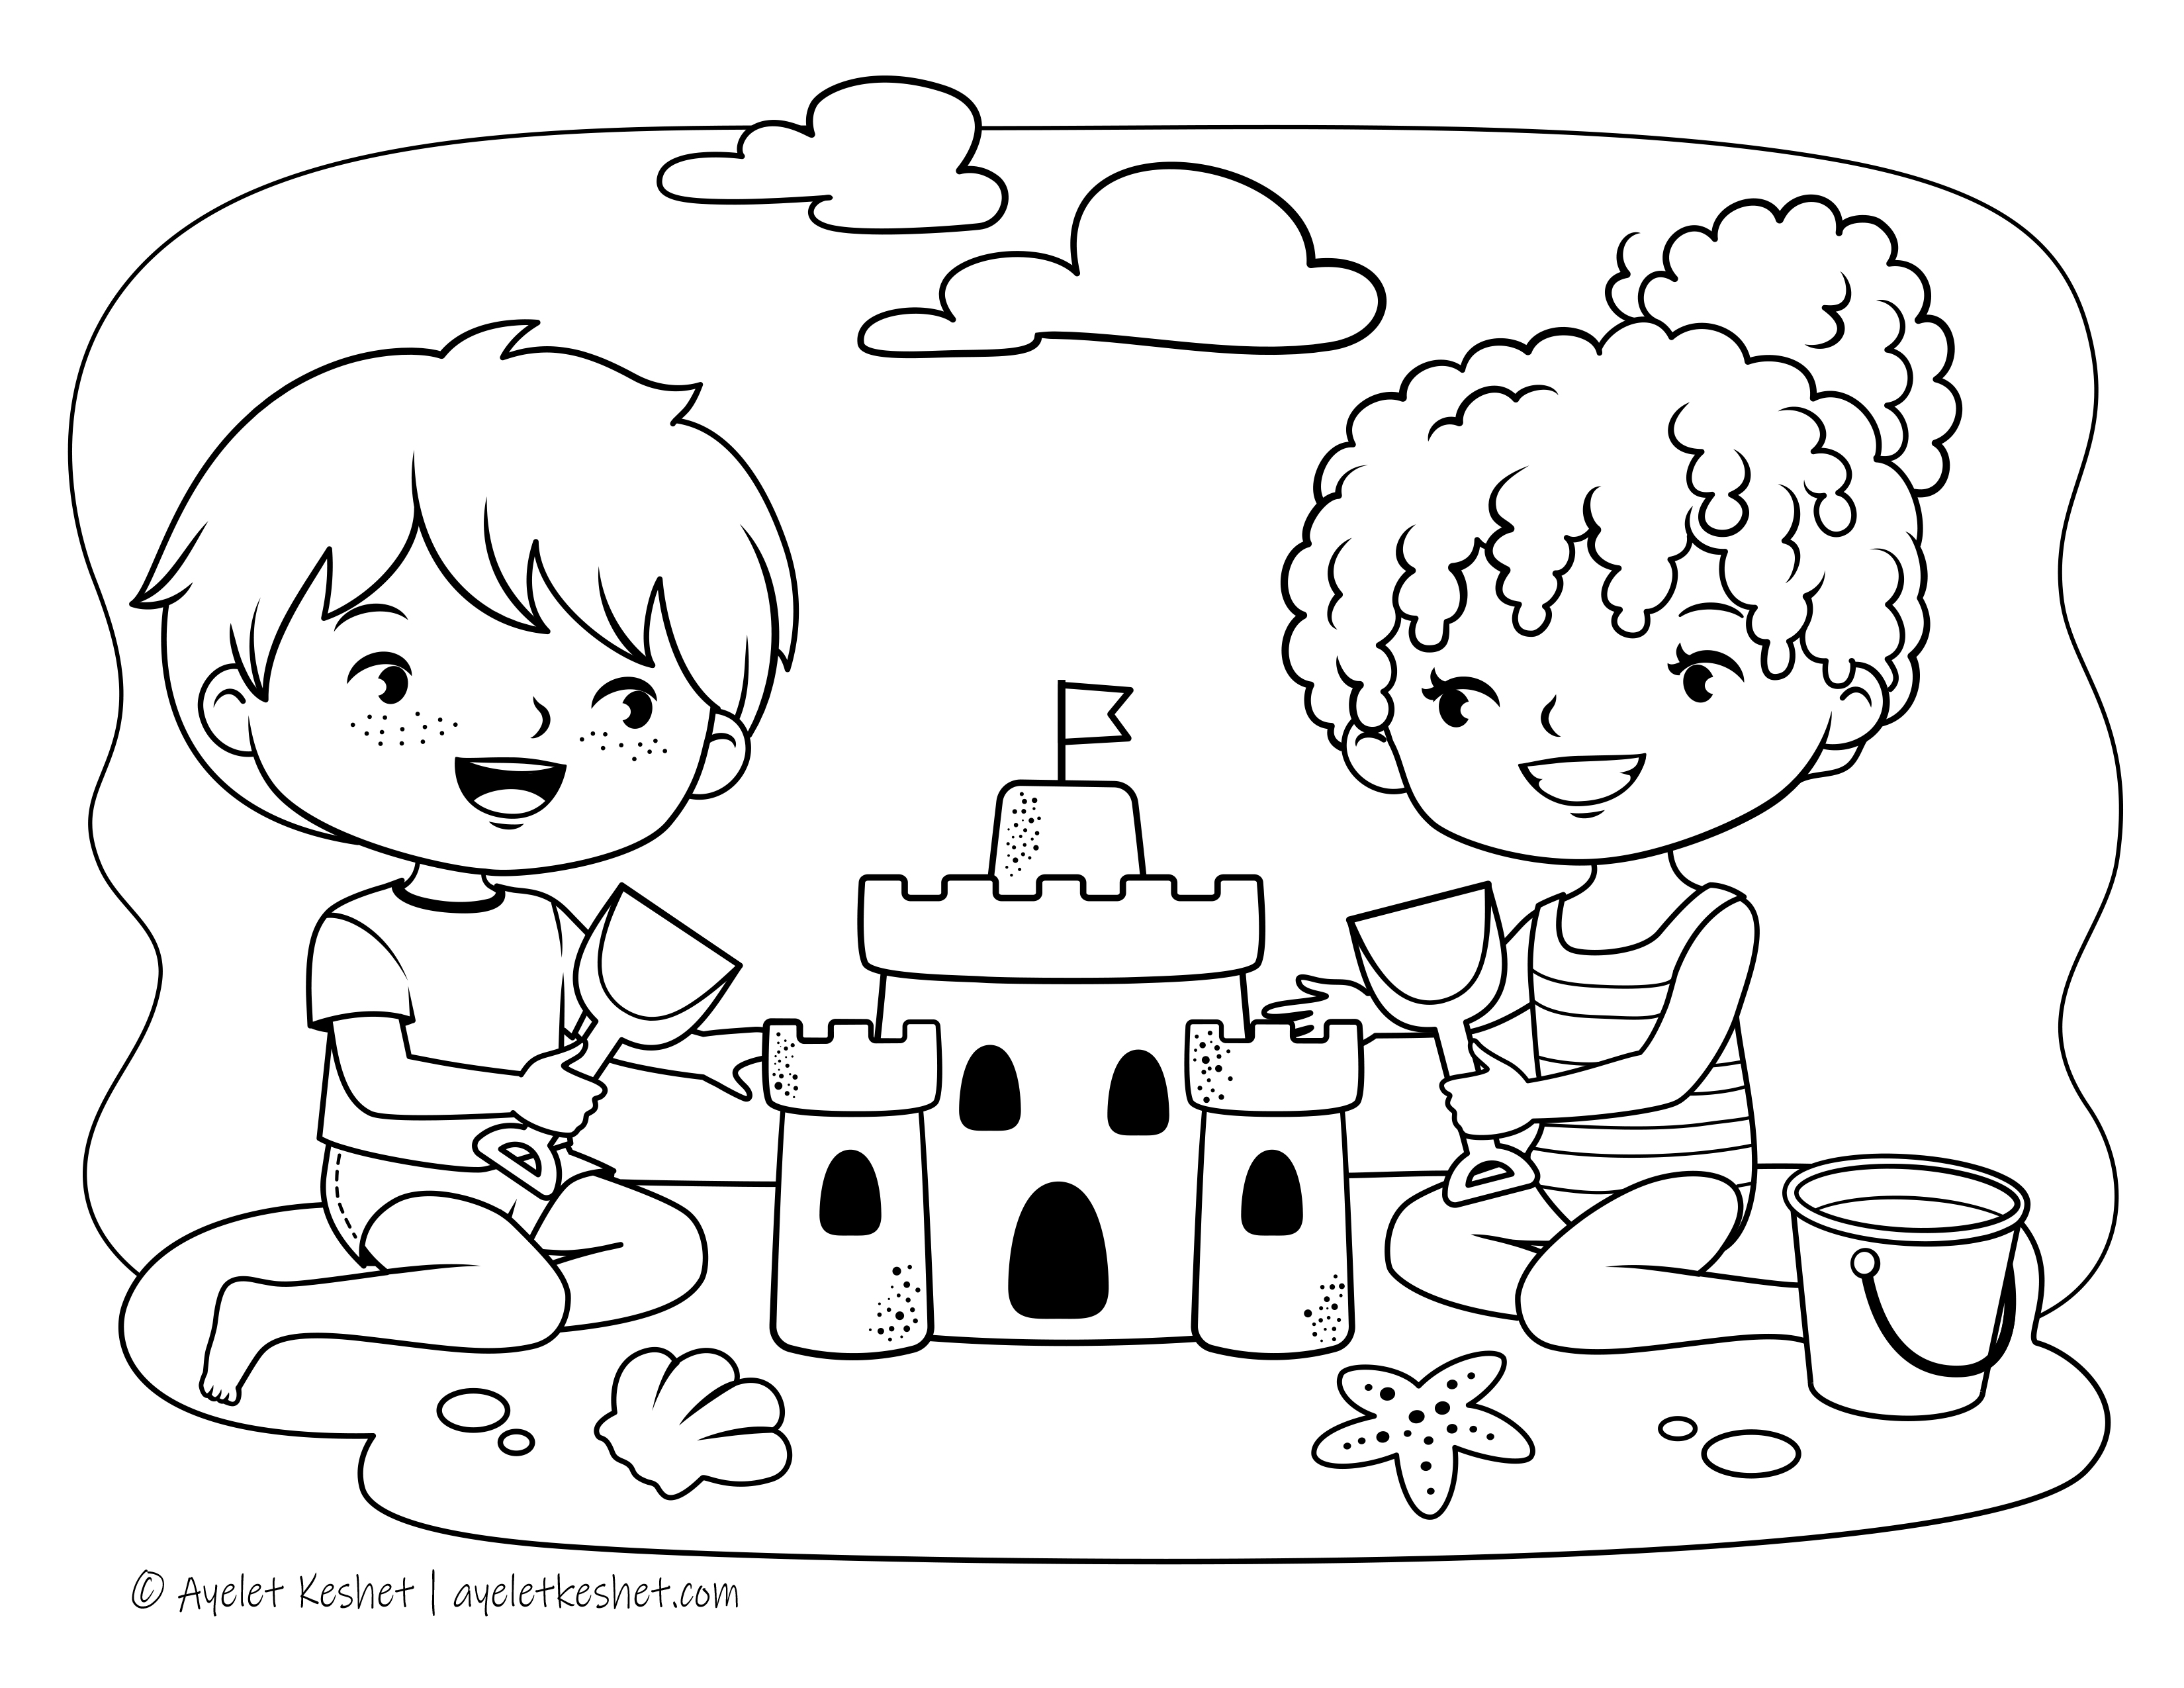 Adorable summer coloring pages for kids   Ayelet Keshet